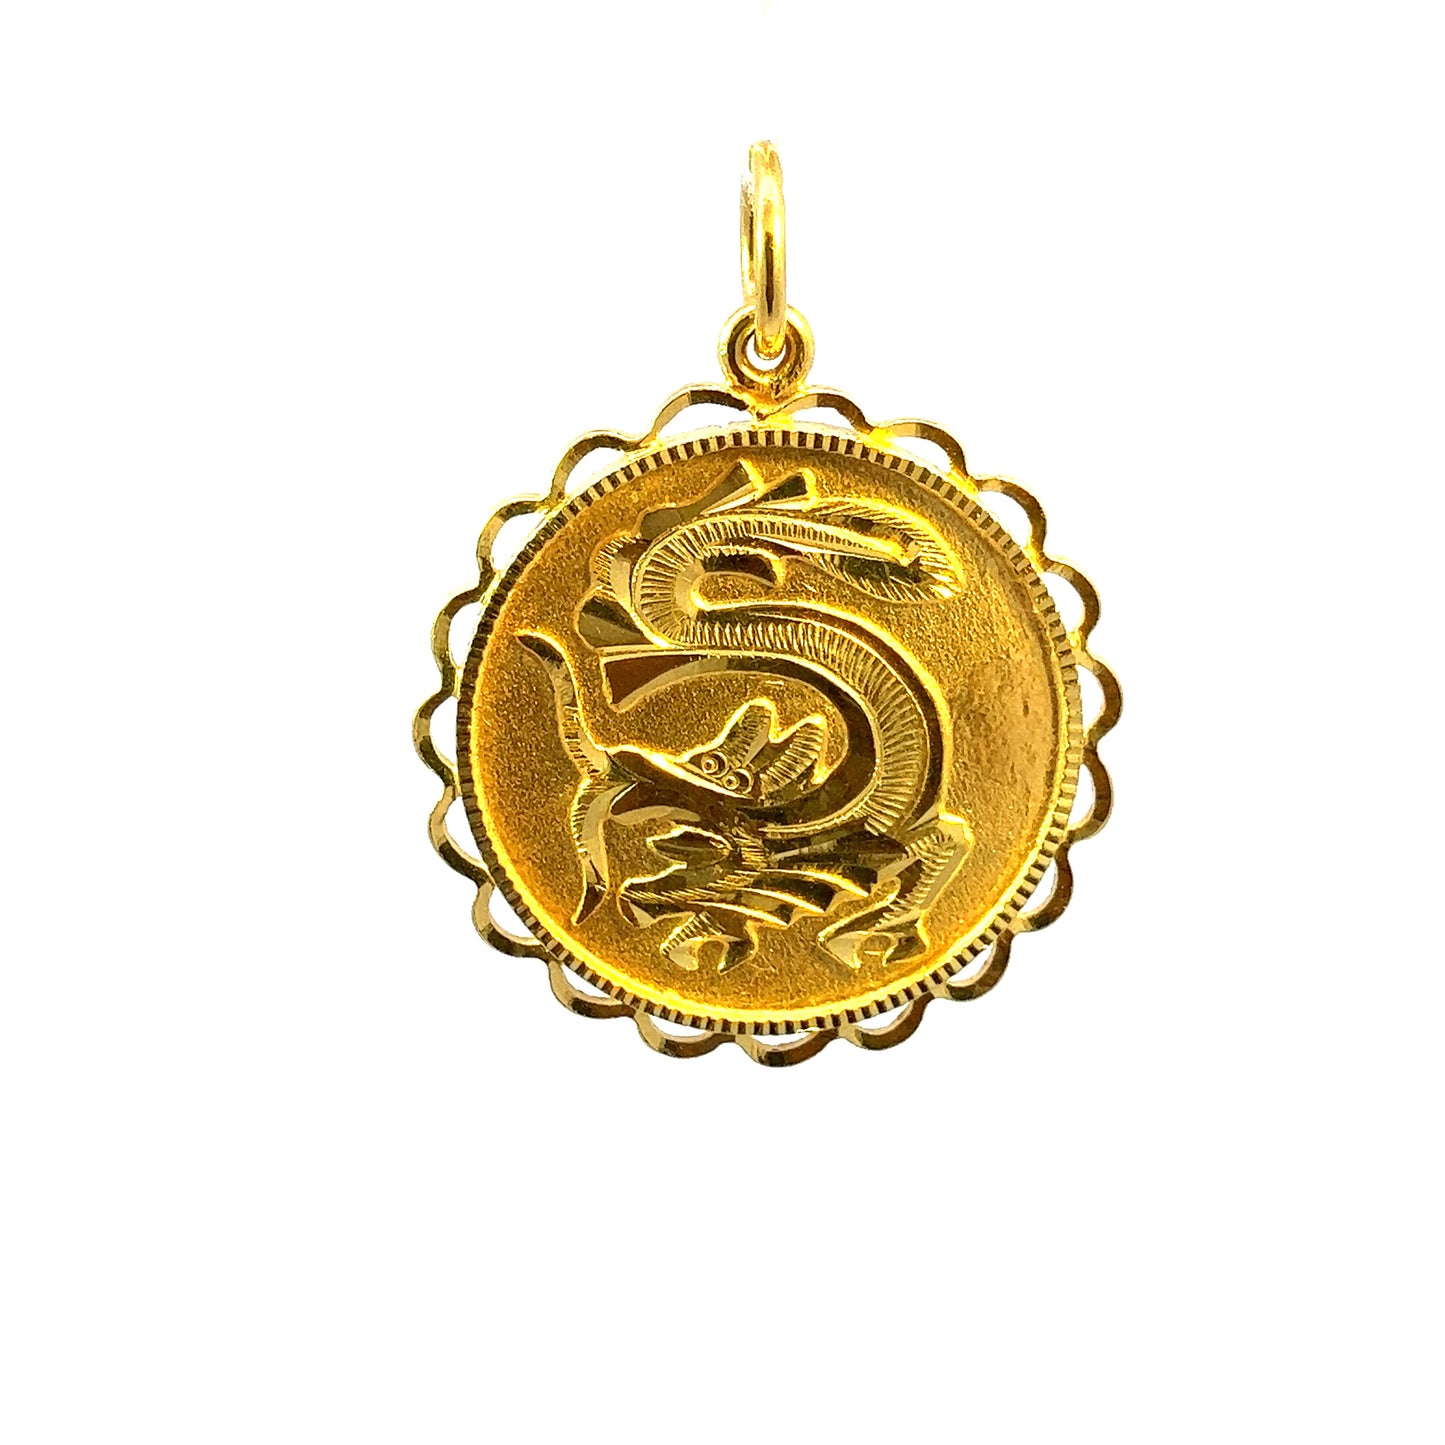 GOLD PENDANT ( 22K ) ( 7.18g ) - 0001211 Chain sold separately